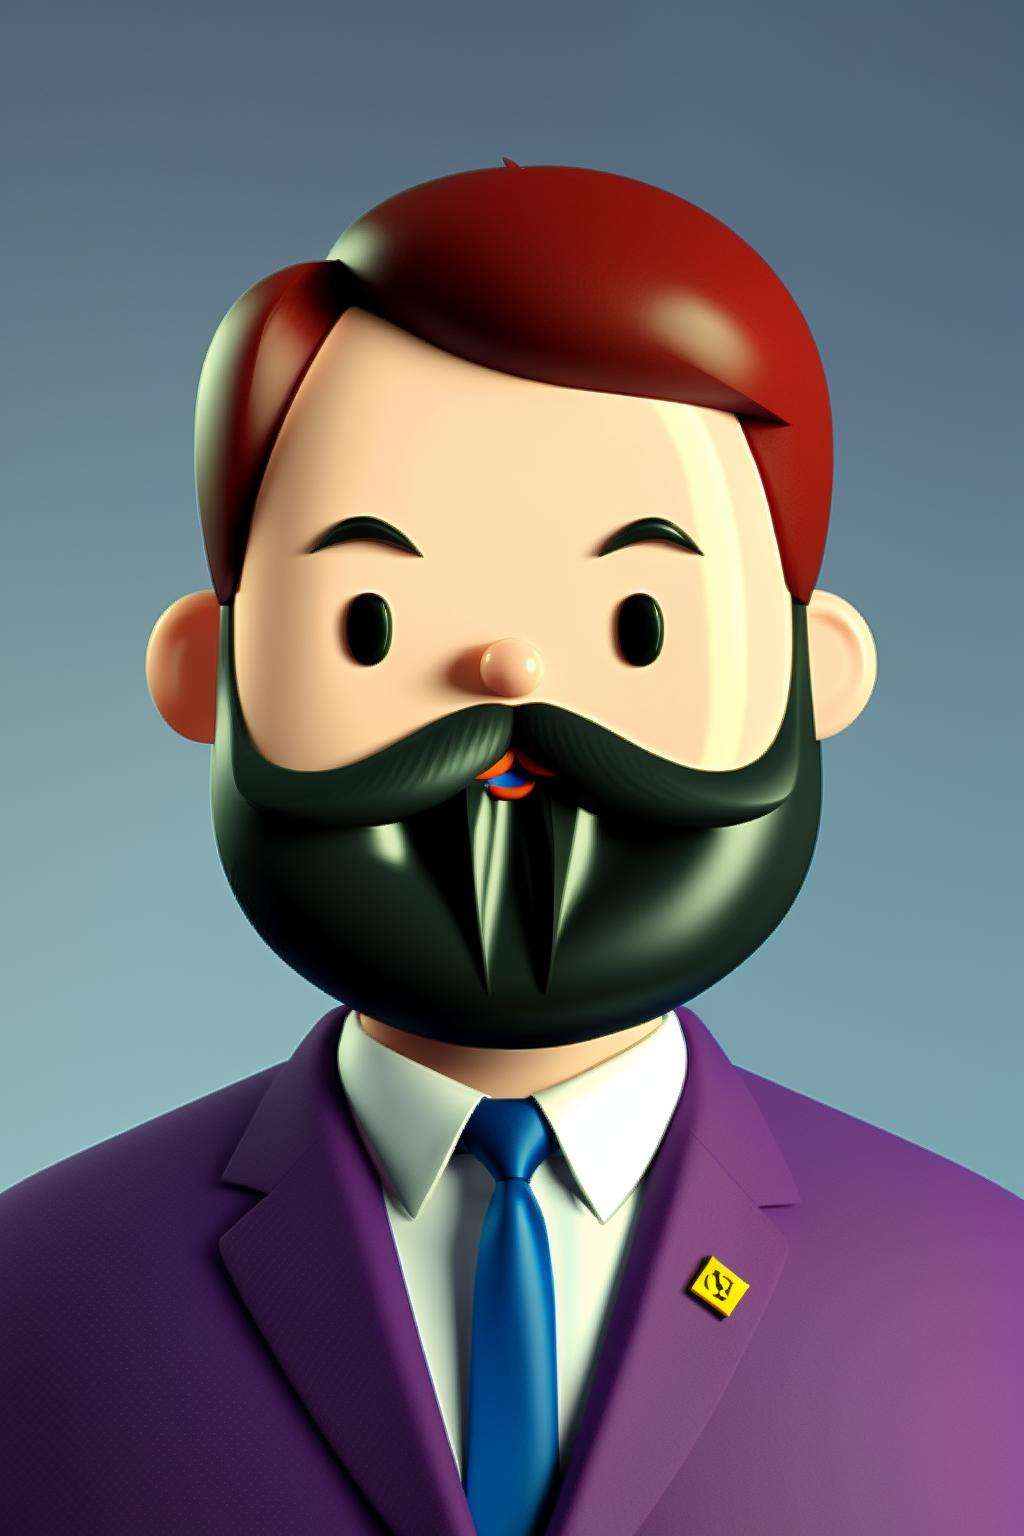 a man with a beard wearing a colorful suit and tie ,  toy_face